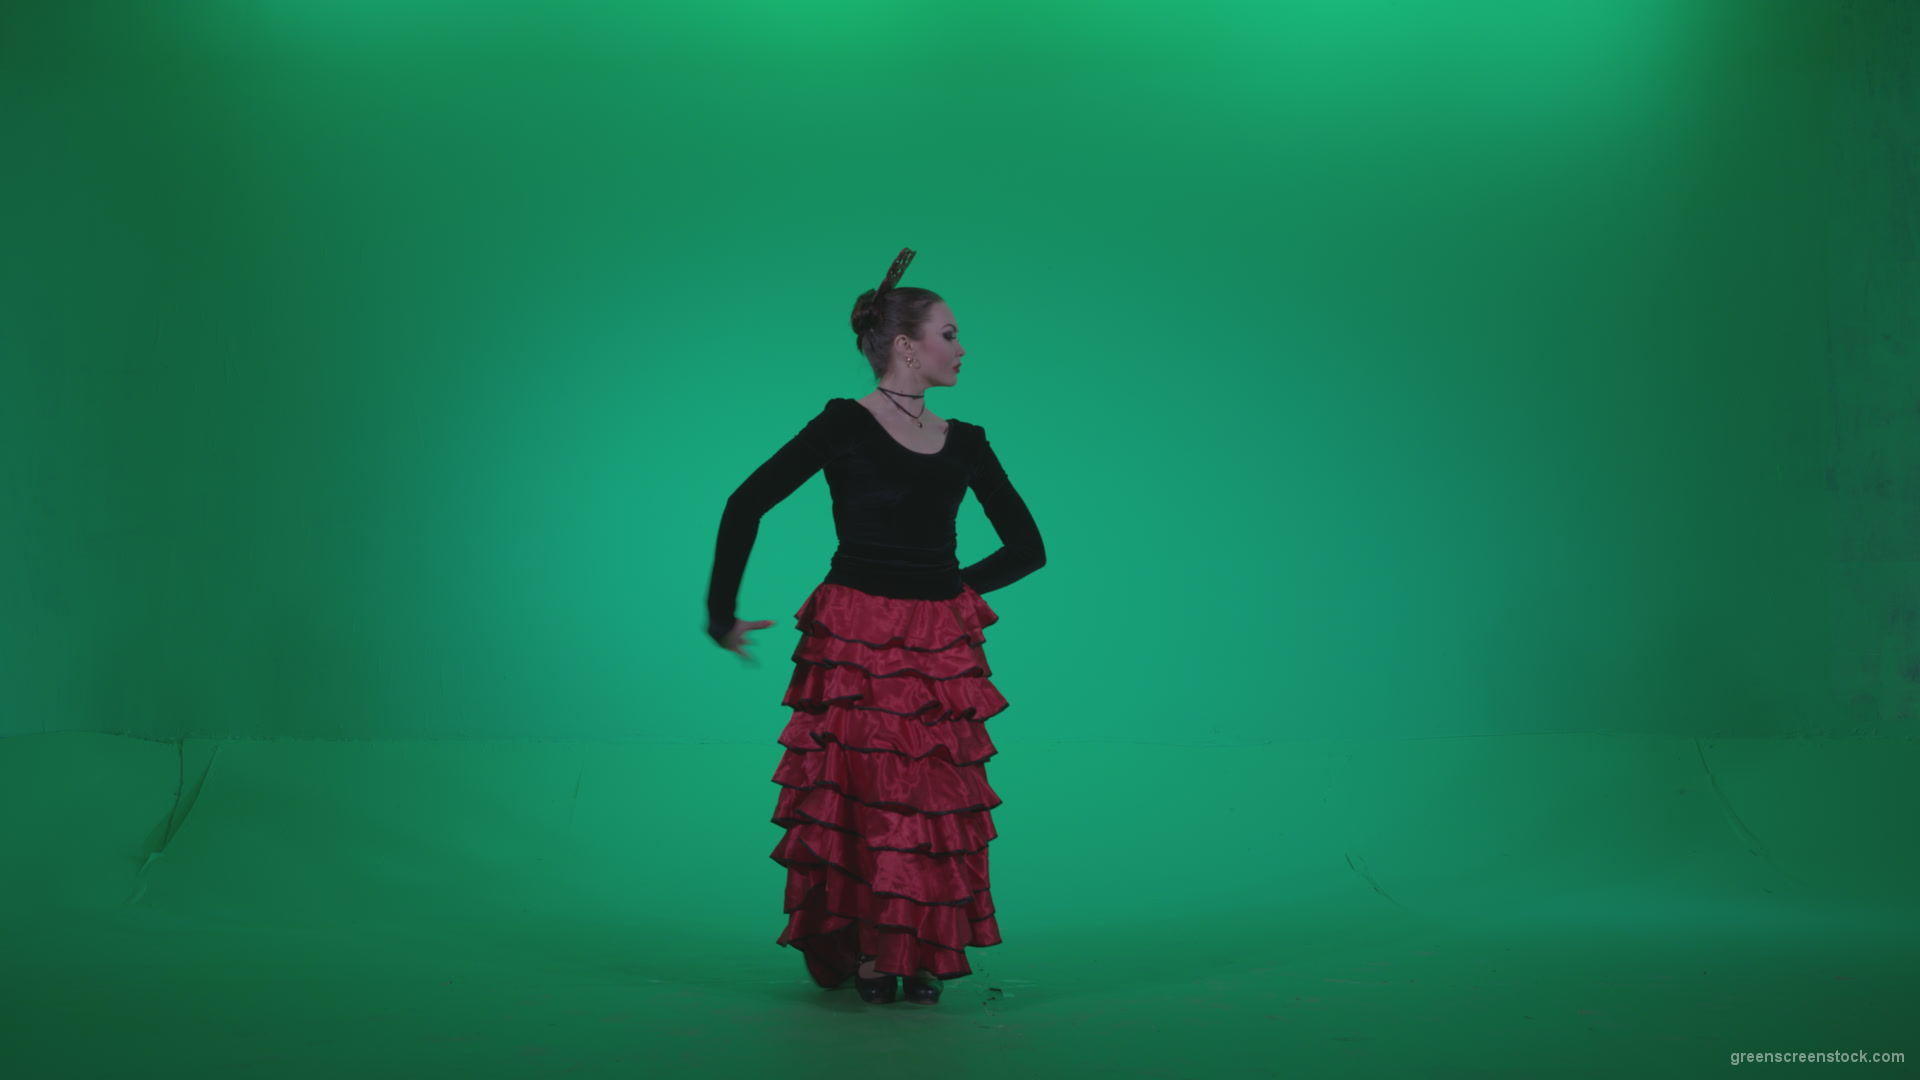 Flamenco-Red-and-Black-Dress-rb5-Green-Screen-Video-Footage_008 Green Screen Stock